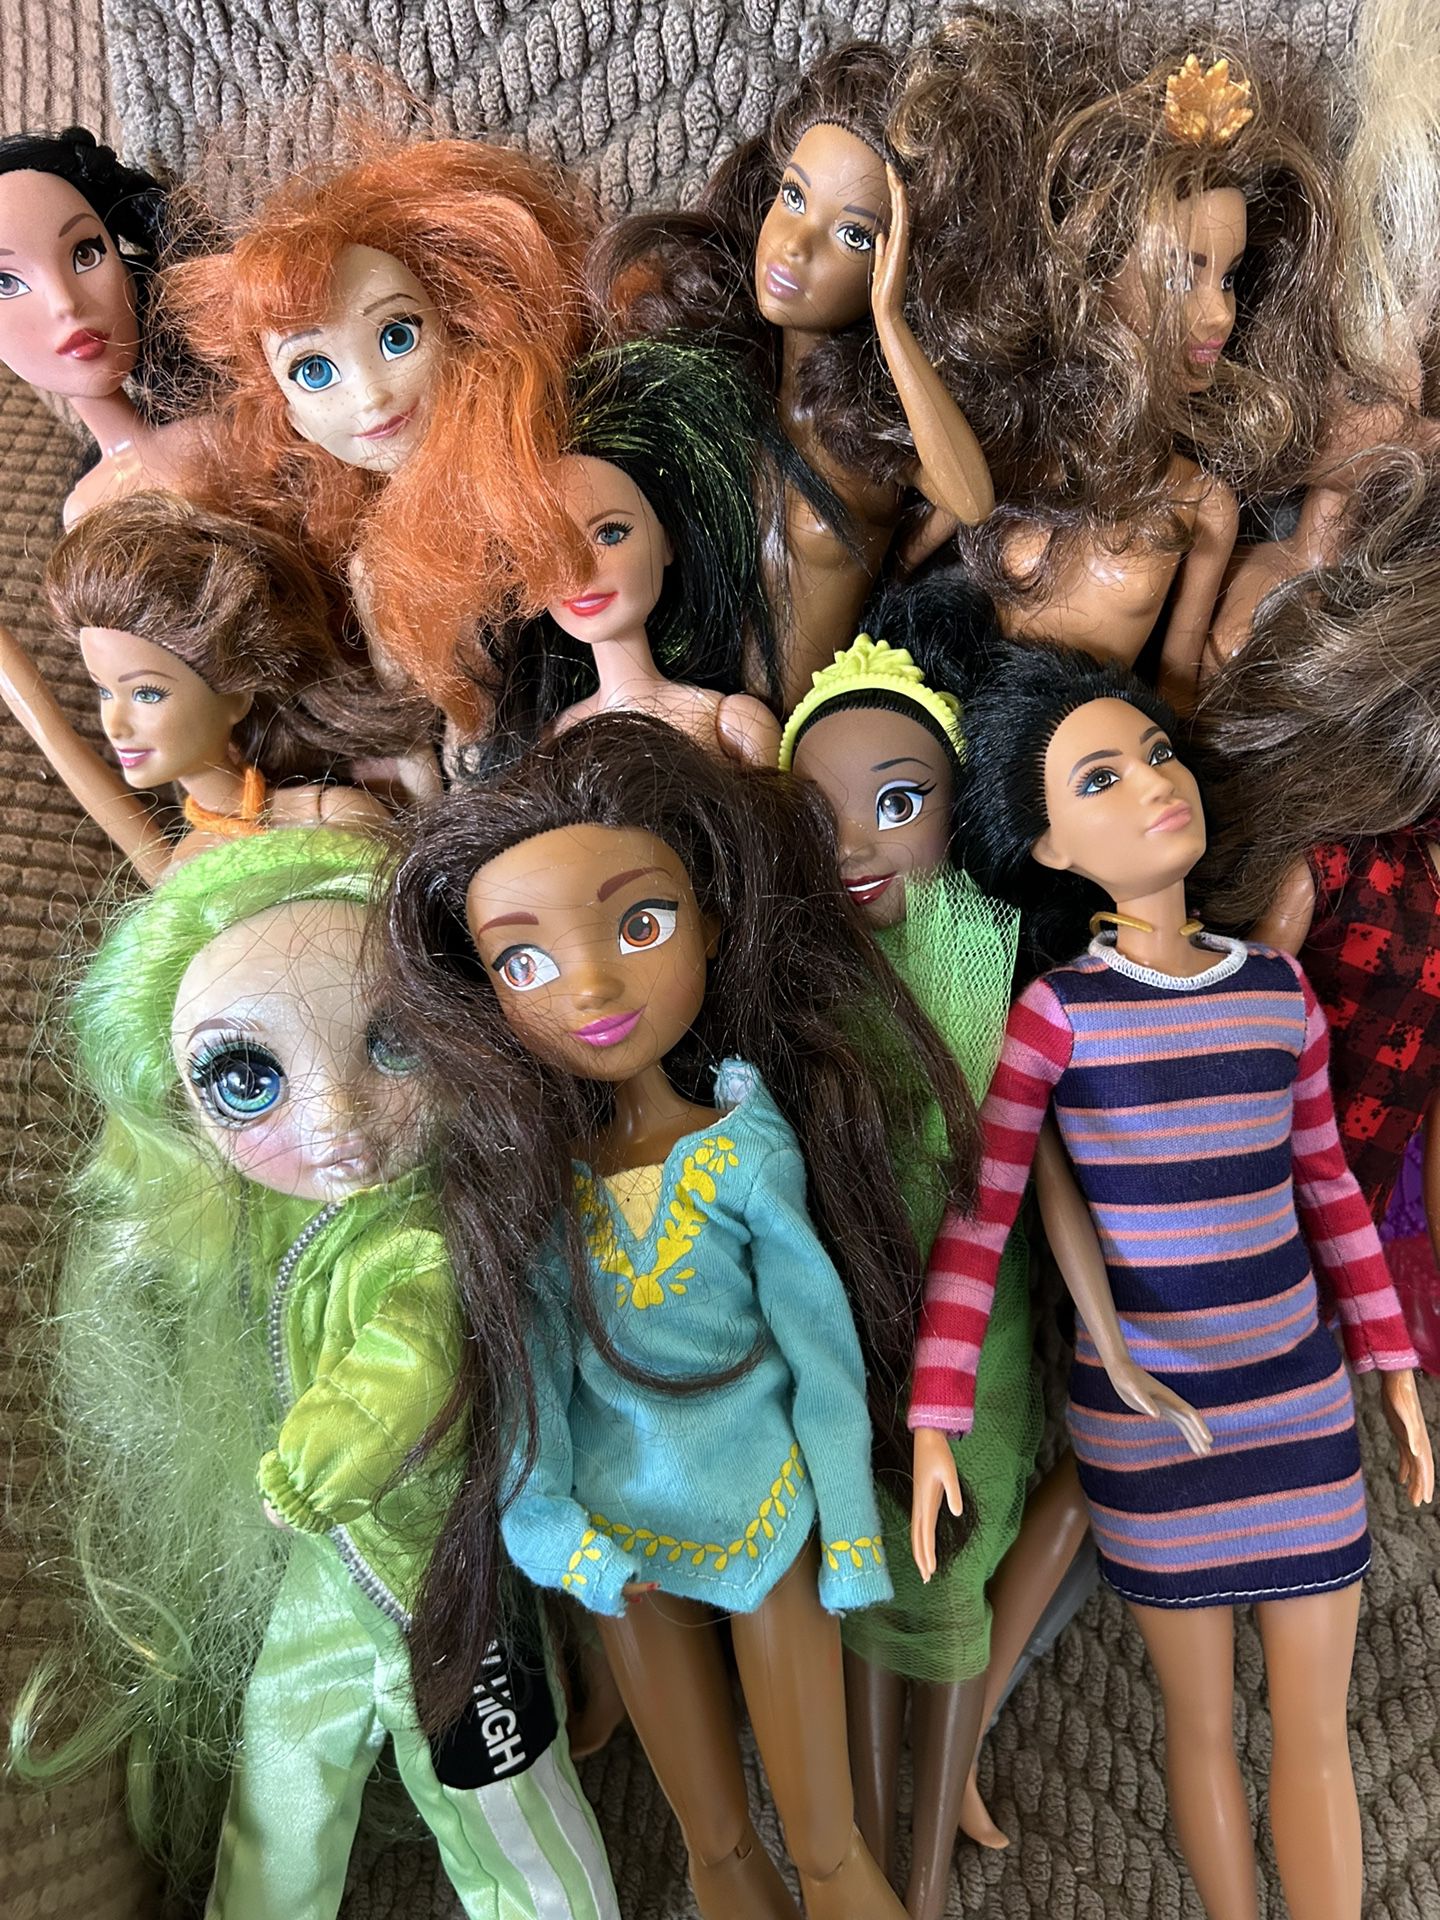 multiple barbie dolls and other Doll Bundle $19